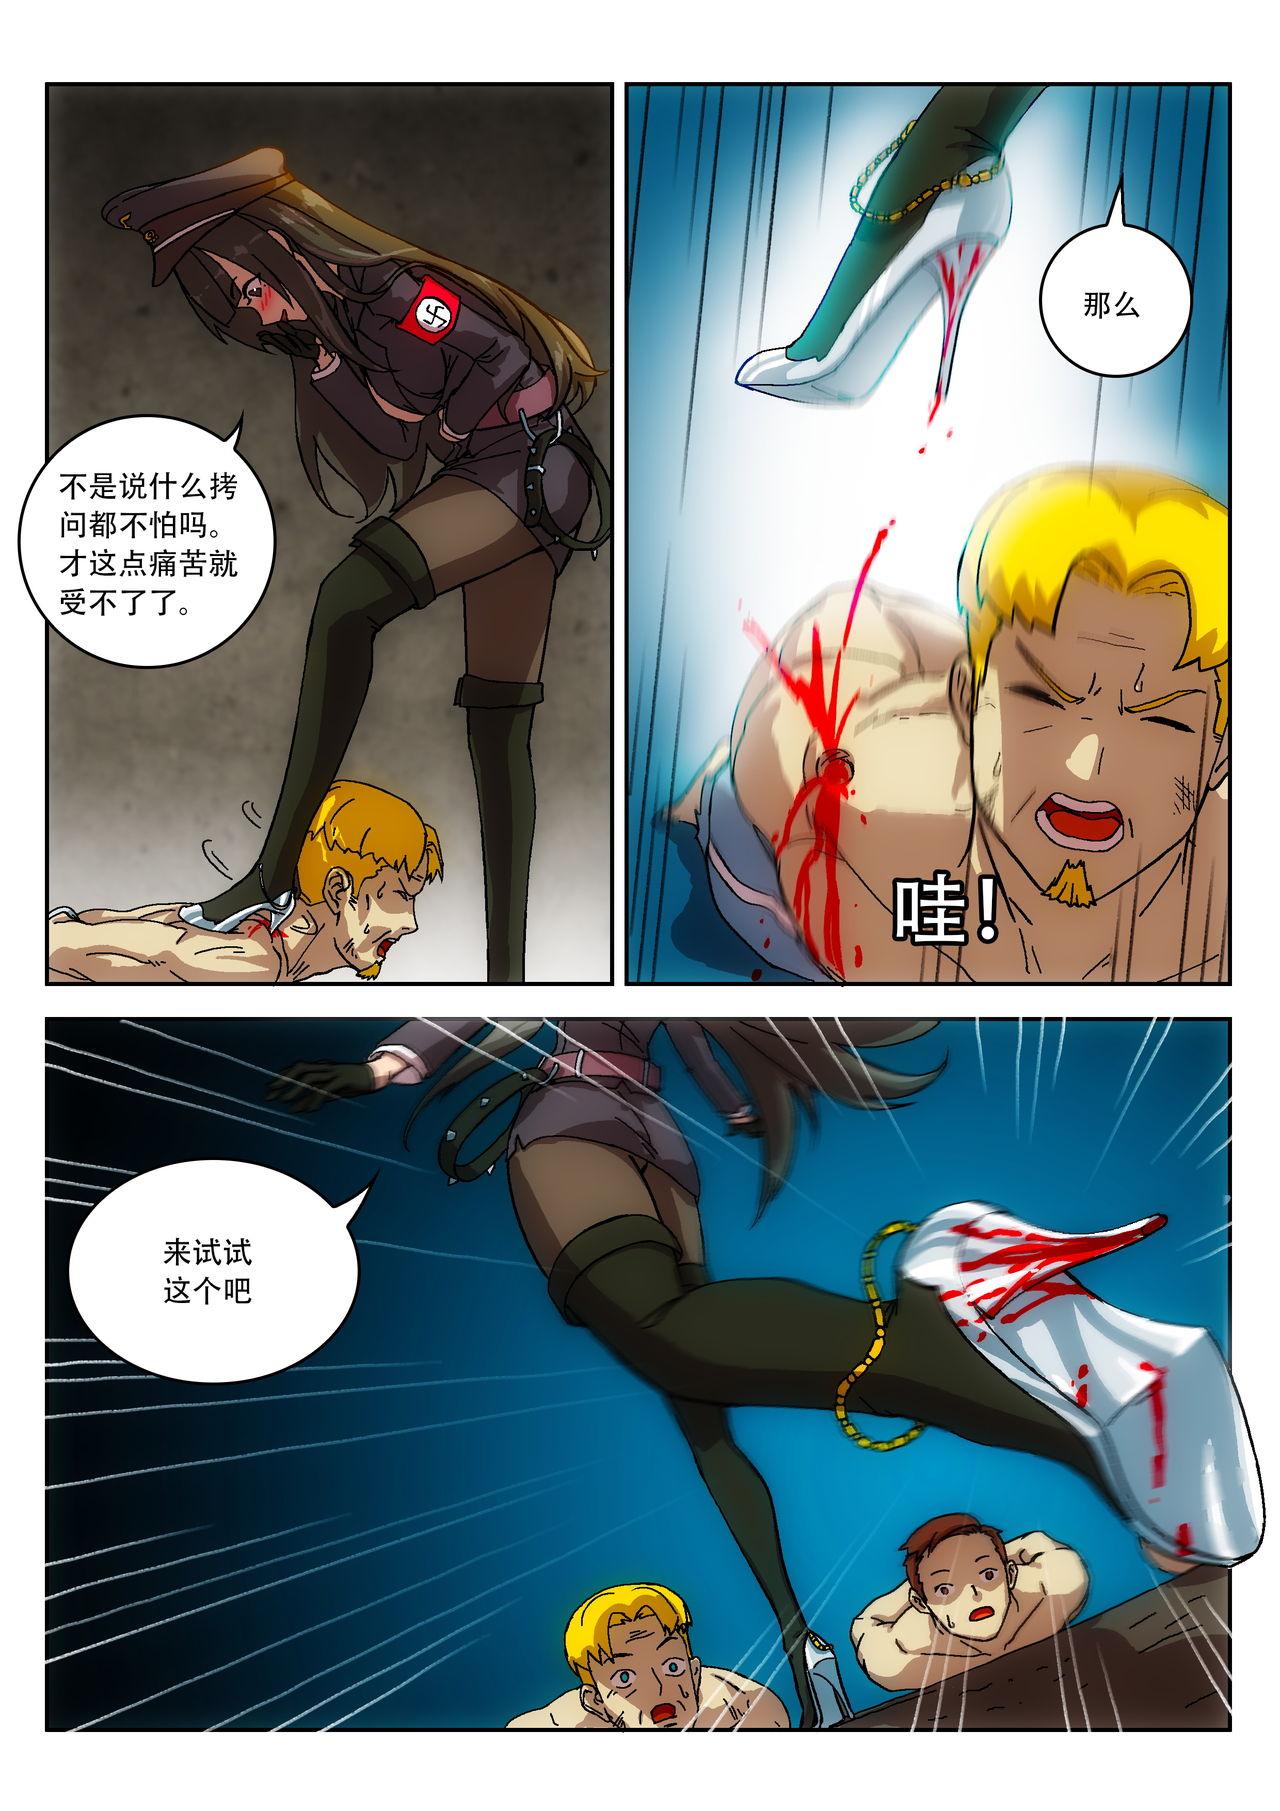 Jerking [Weixiefashi] Empire executioner Alice-sama's thigh-high boots trampling crushing torturing session full colour [帝国处刑官爱丽丝大人的长靴踩杀拷问][全彩] Hogtied - Page 5